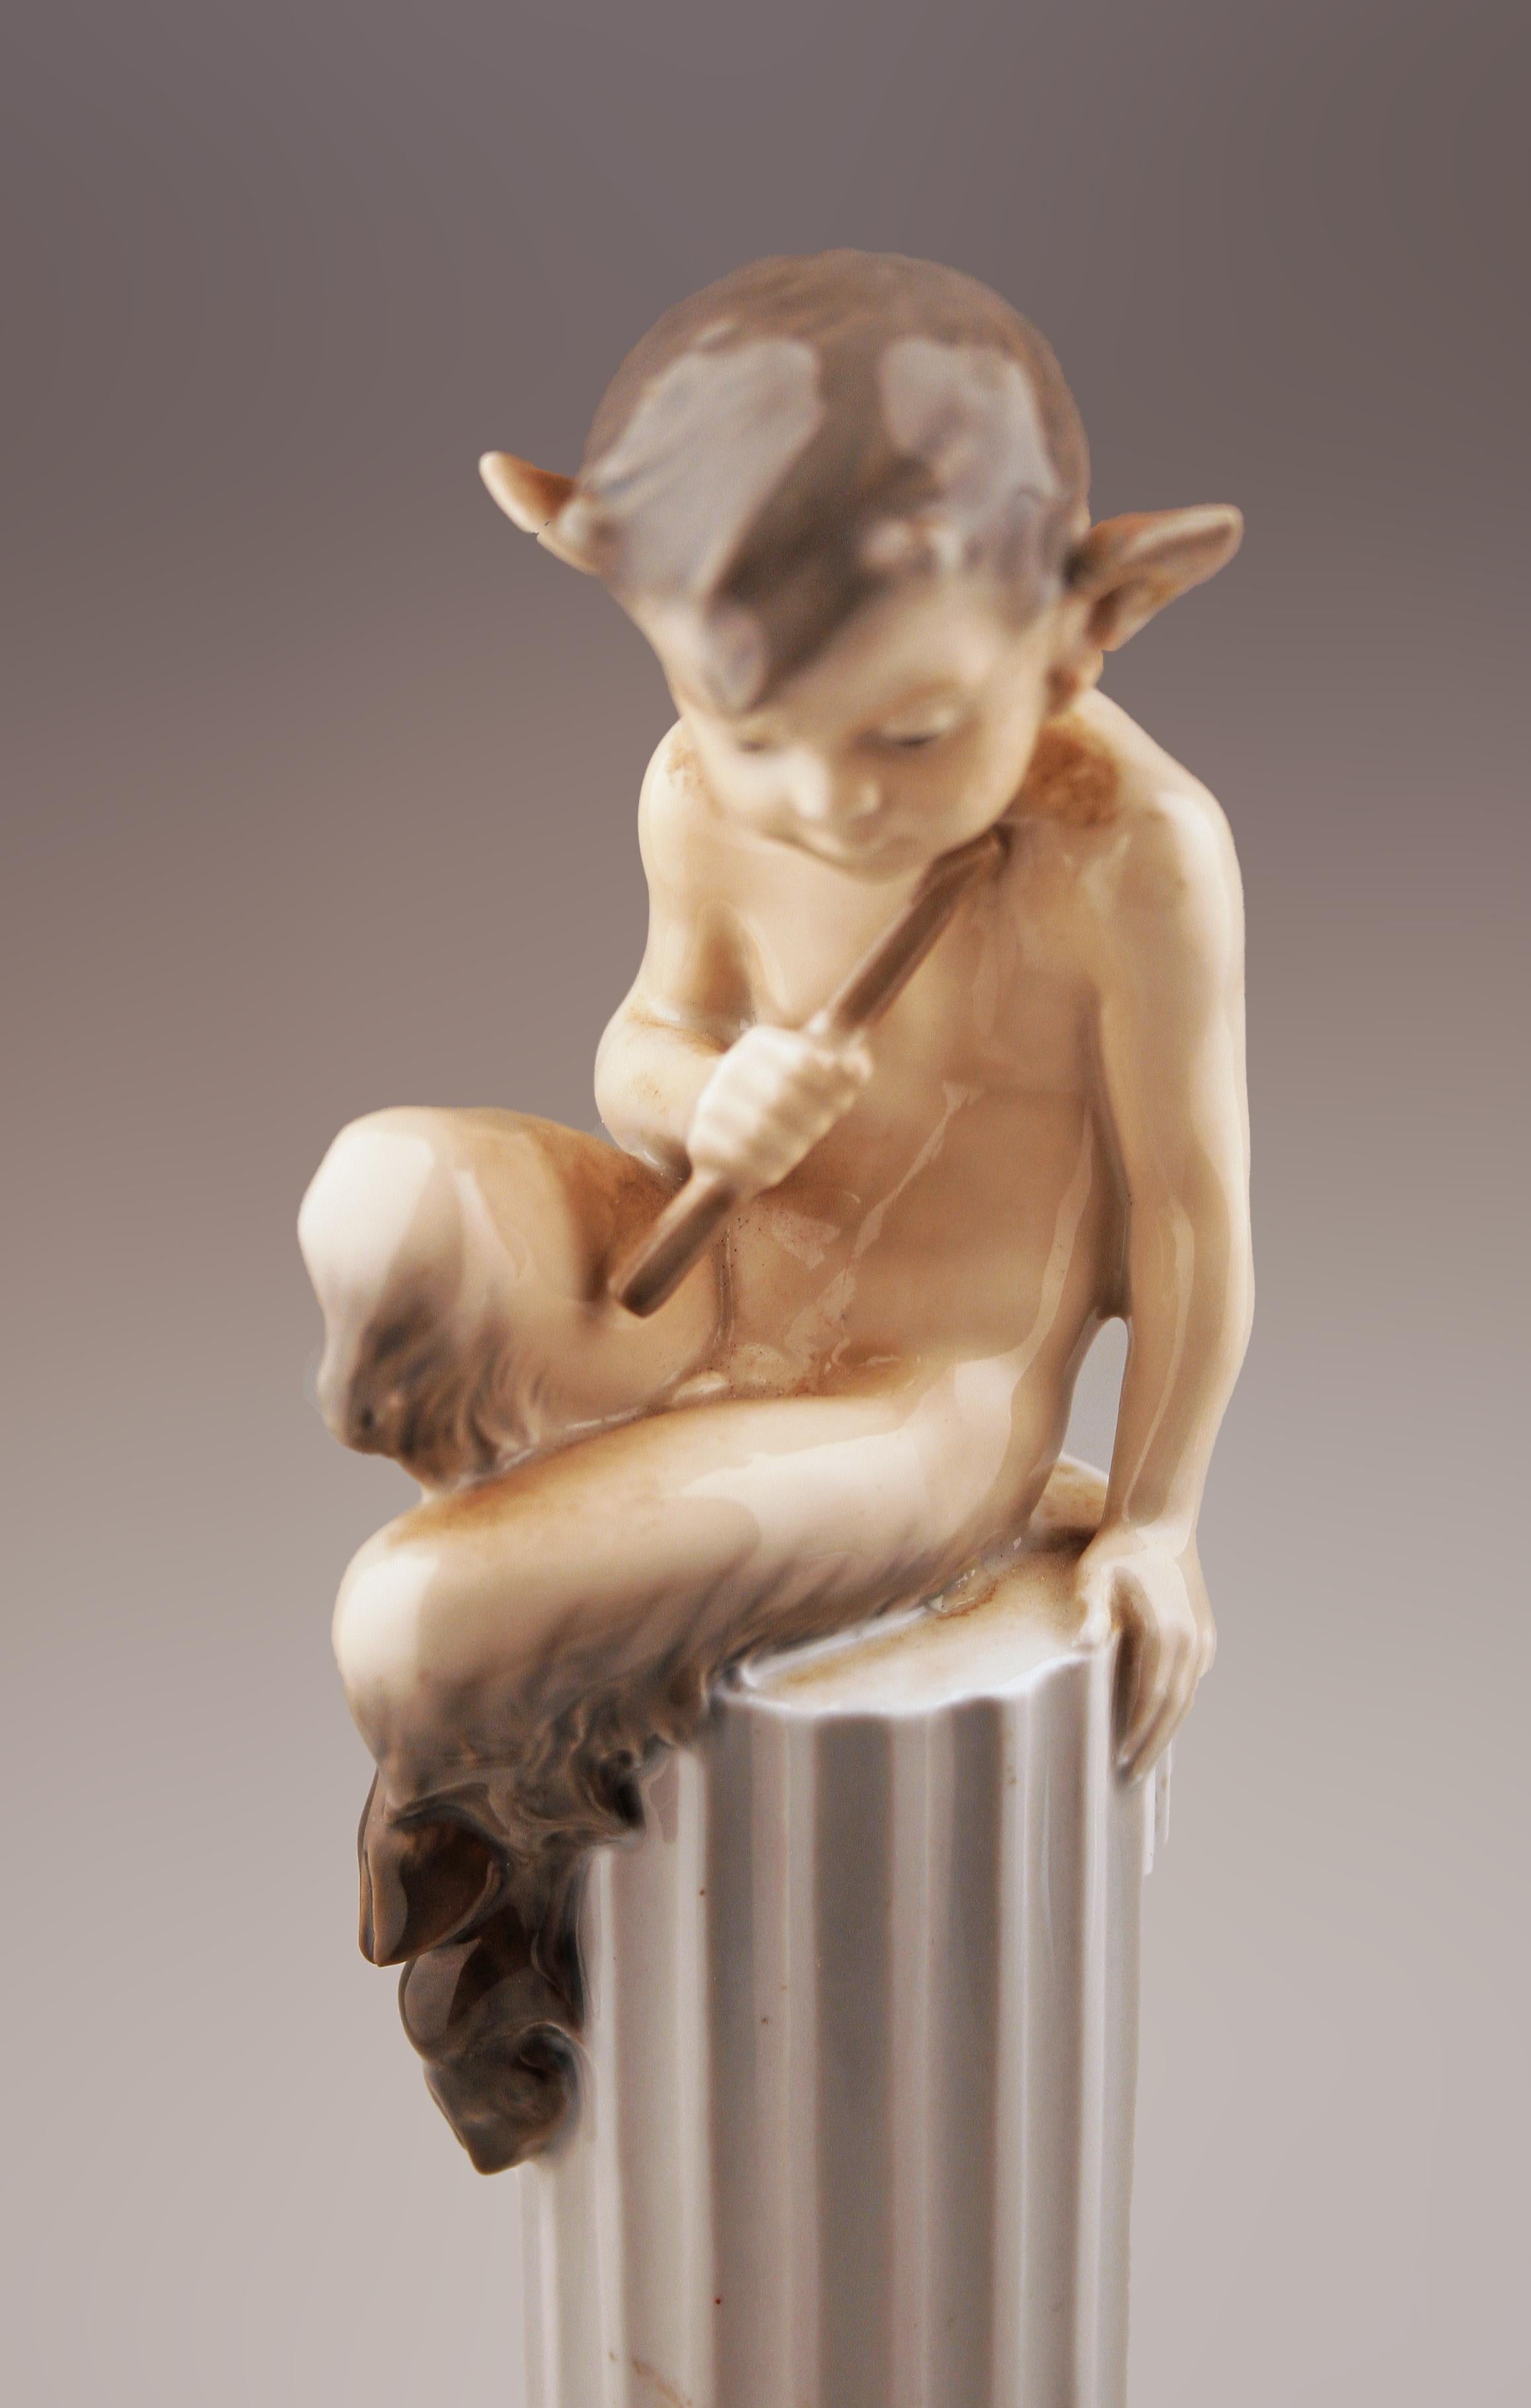 Painted Mid-20th Century Porcelain Sculpture of Faun and a Rabbit by Royal Copenhagen For Sale